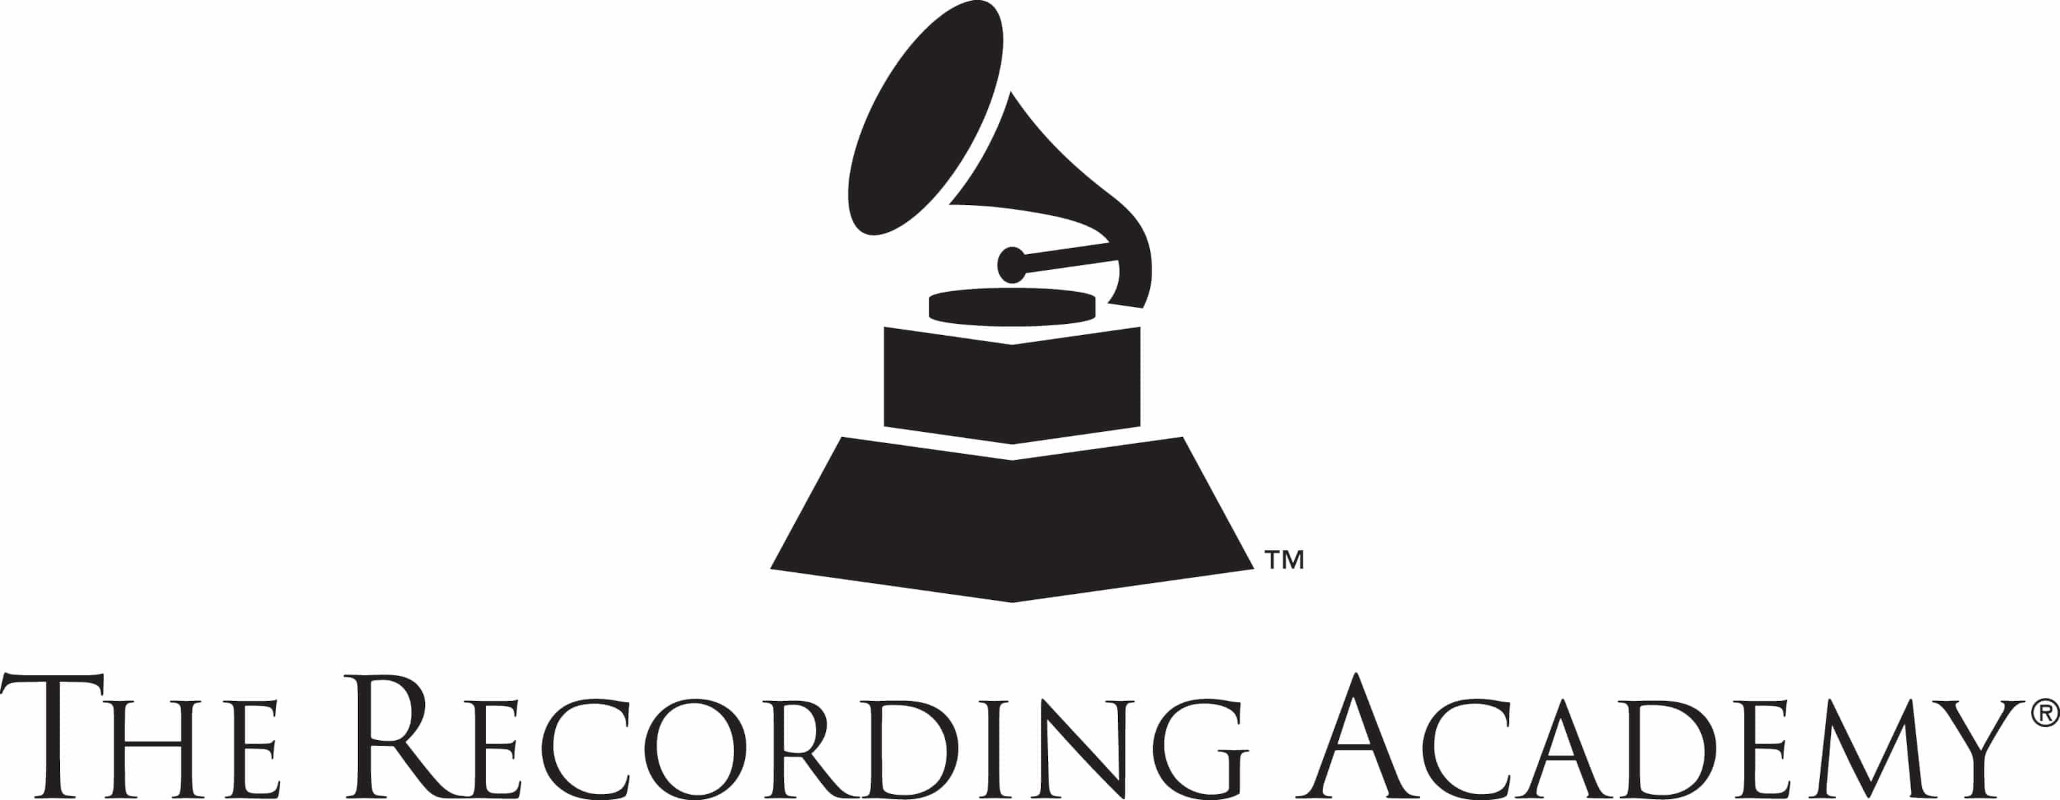 The 64th Annual Grammy Awards Open First Round Voting with New Format